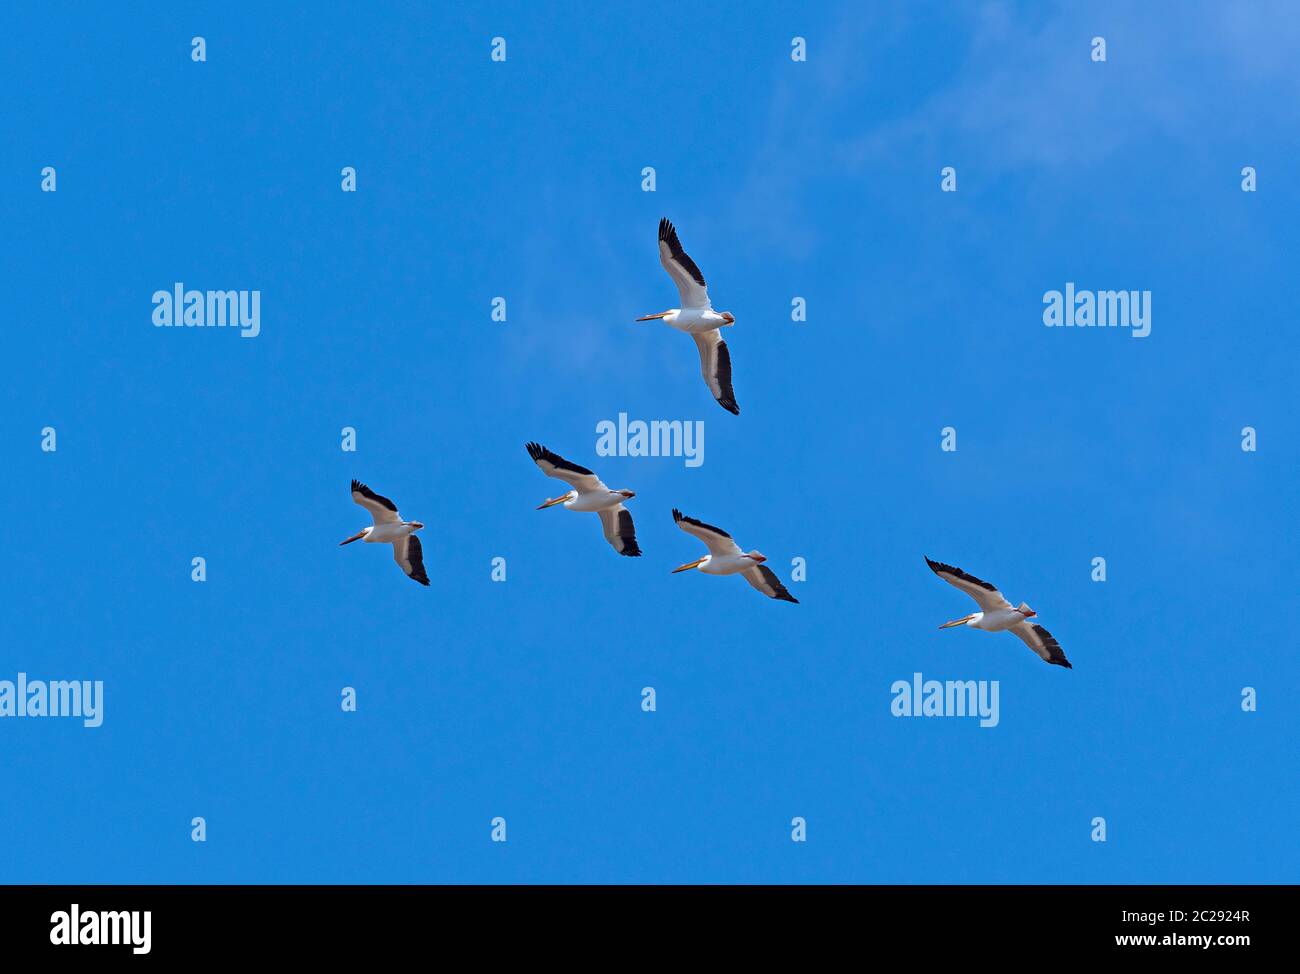 A Group of White Pelican Flying Overhead in Horicon National Wildlife Refuge in Wisconsin Stock Photo